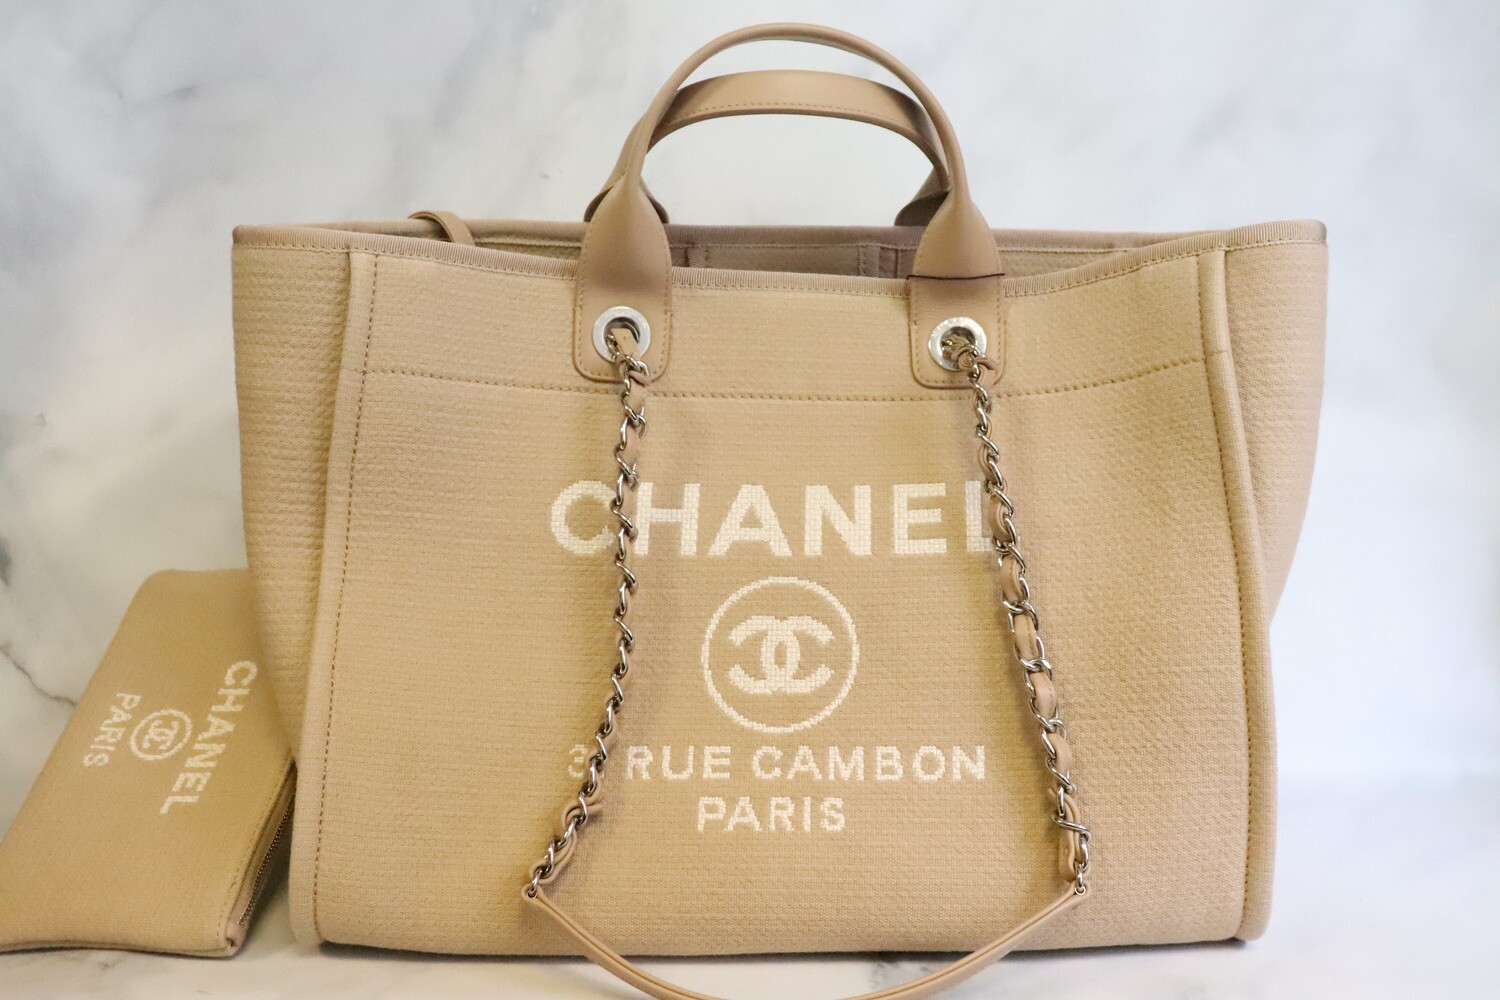 💵3999 CHANEL Deauville Tote ⭐️BRAND NEW IN BOX⭐️ ❗️Seller